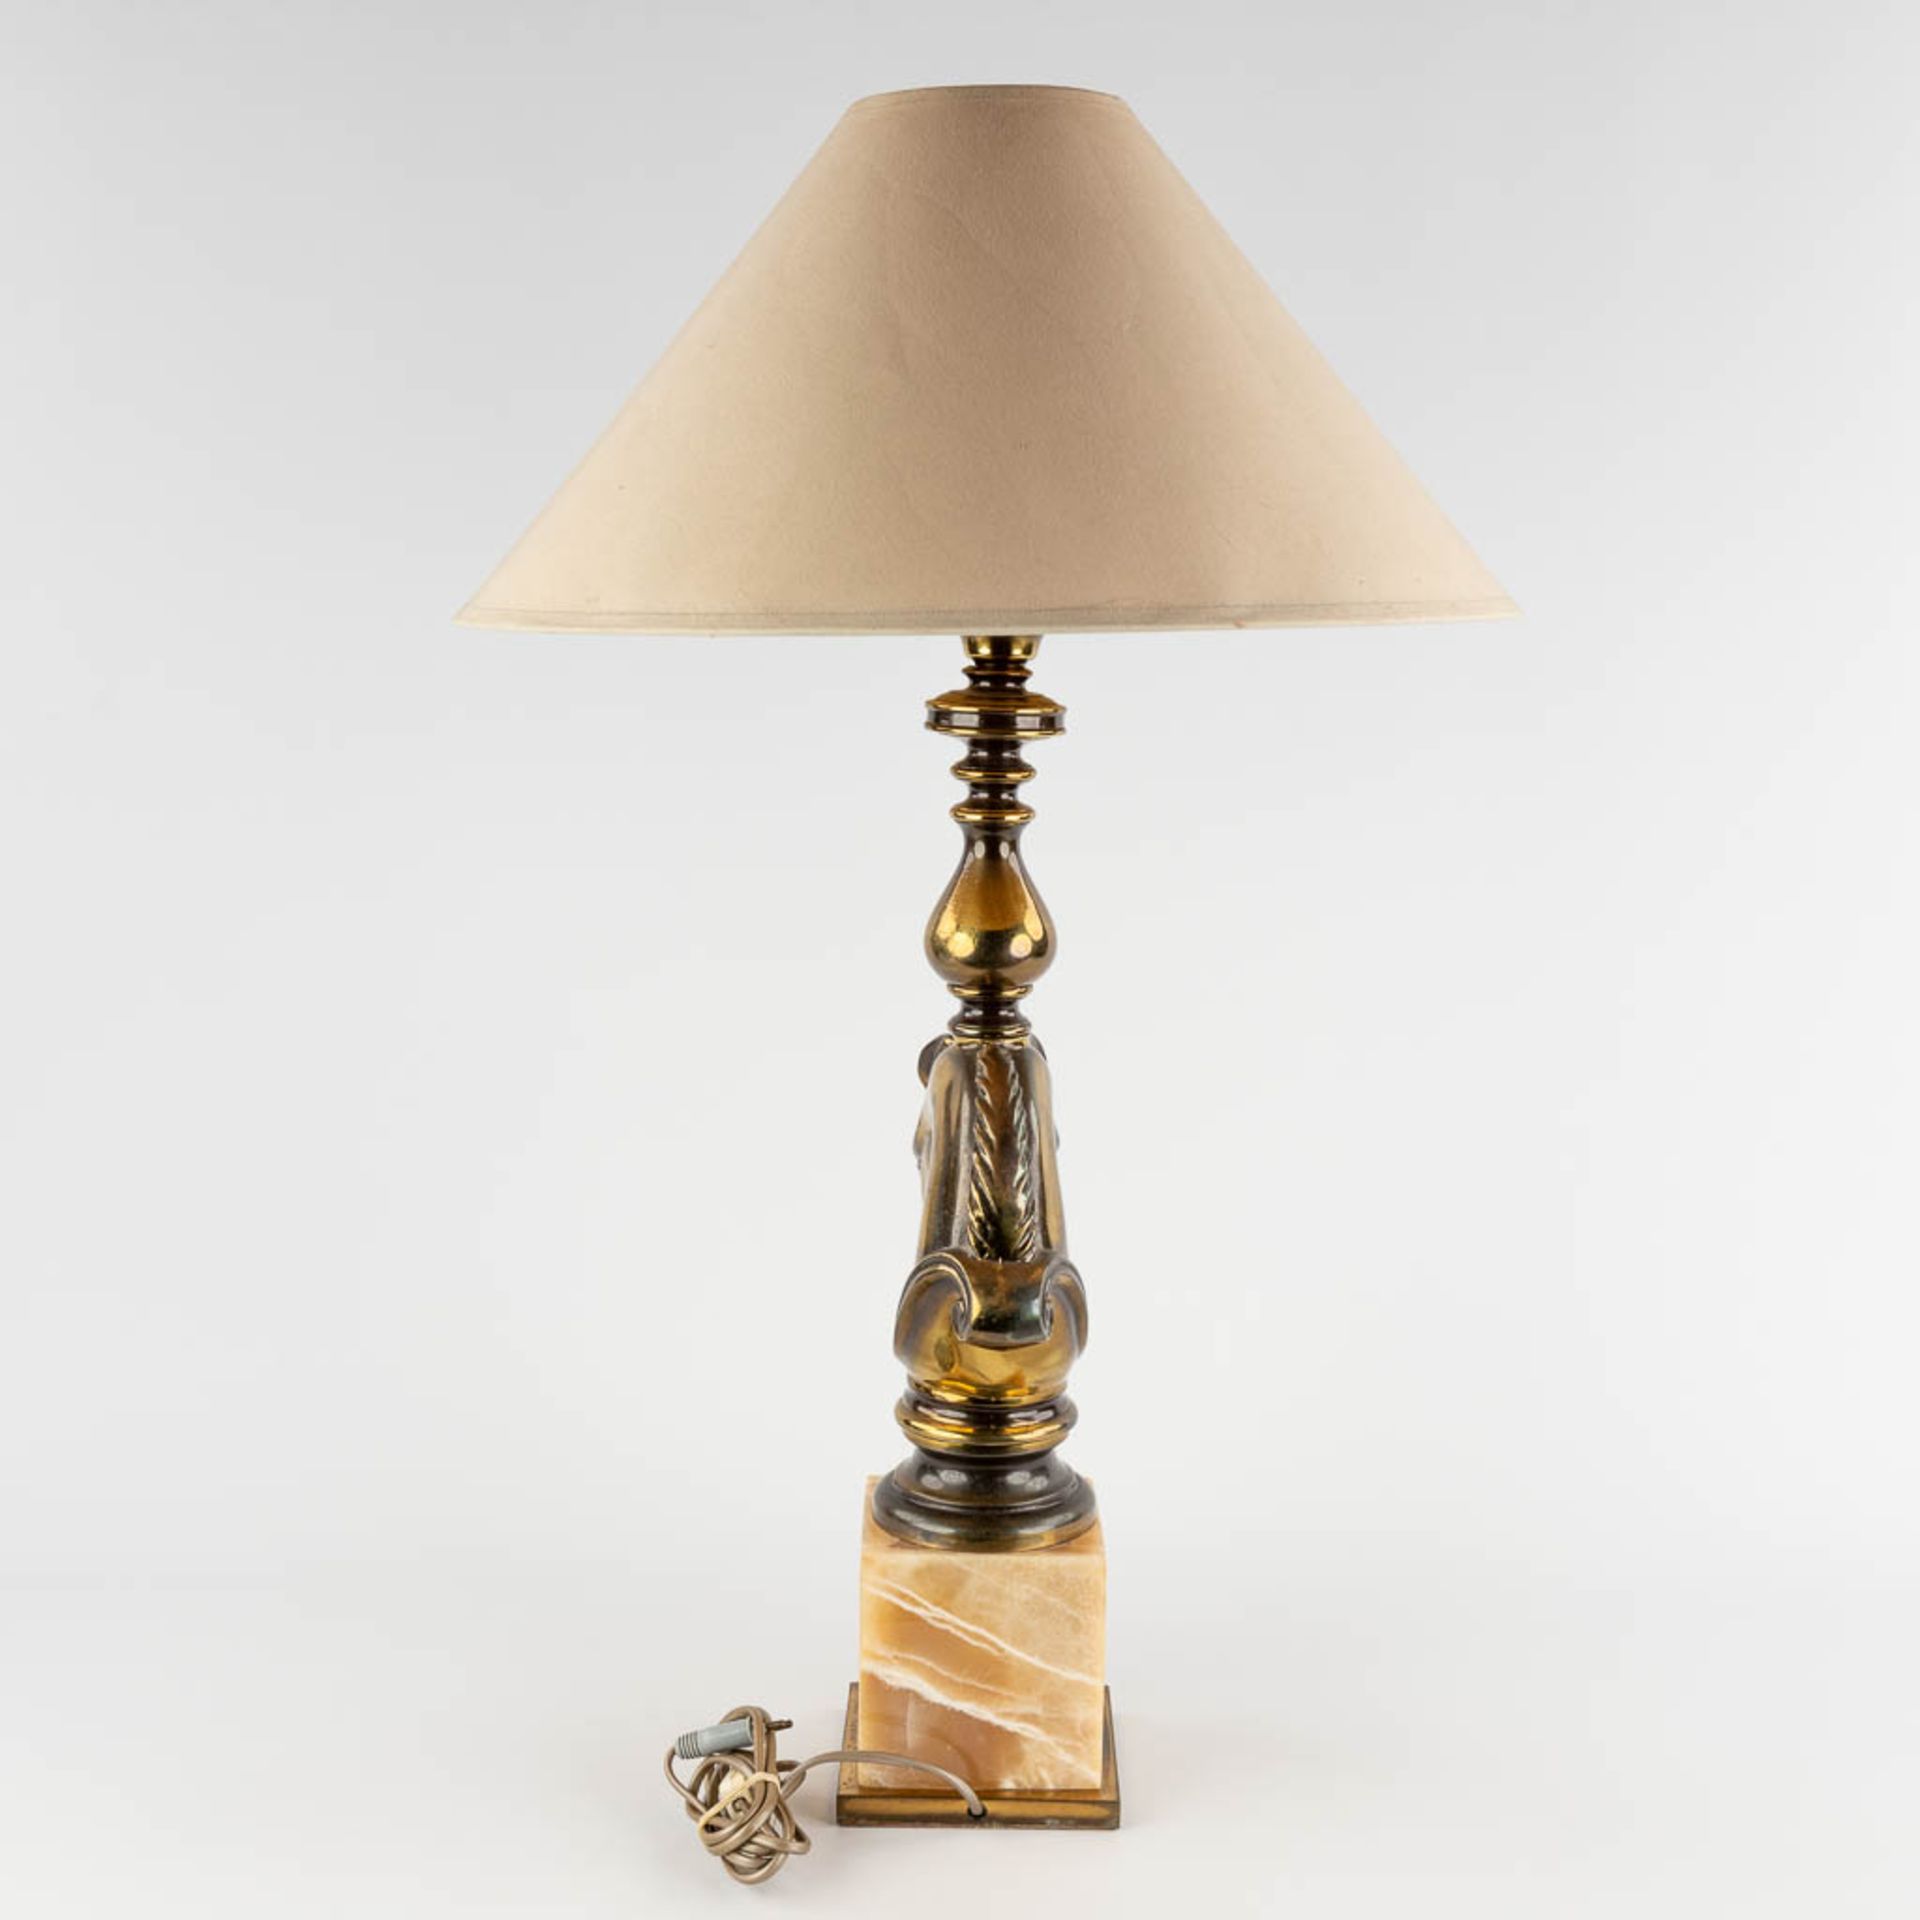 Deknudt, A table lamp with horse head, bronze on onyx. (D:14 x W:18 x H:60 cm) - Image 4 of 10